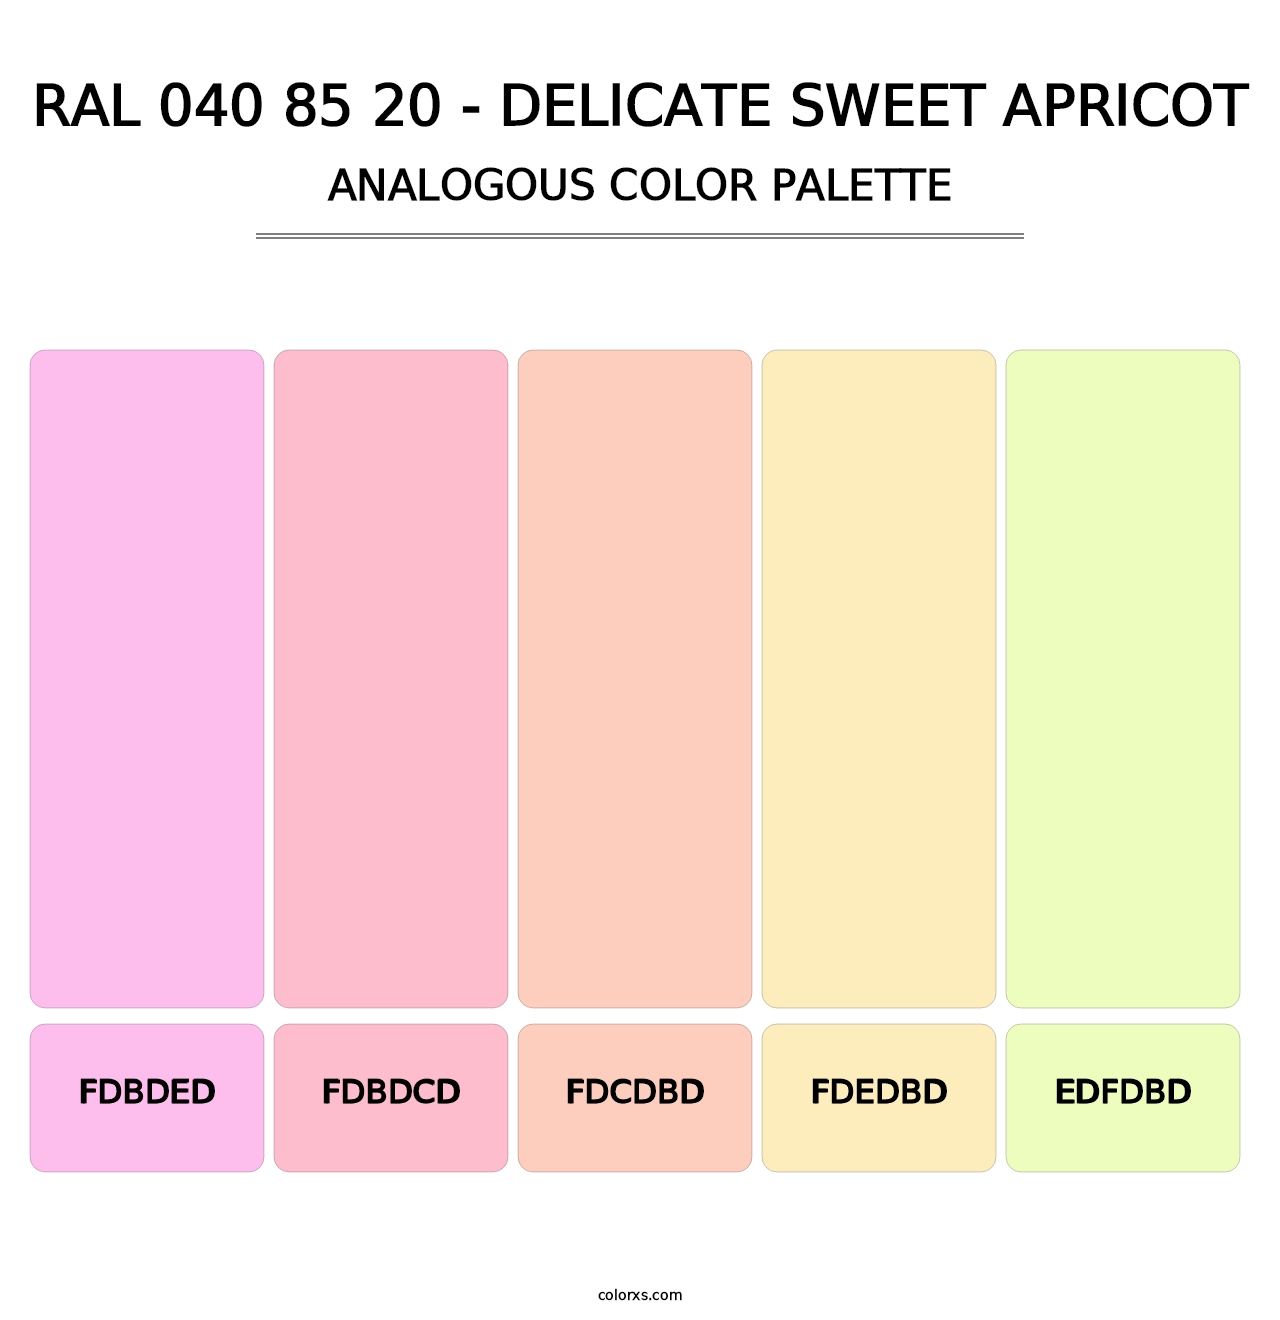 RAL 040 85 20 - Delicate Sweet Apricot - Analogous Color Palette